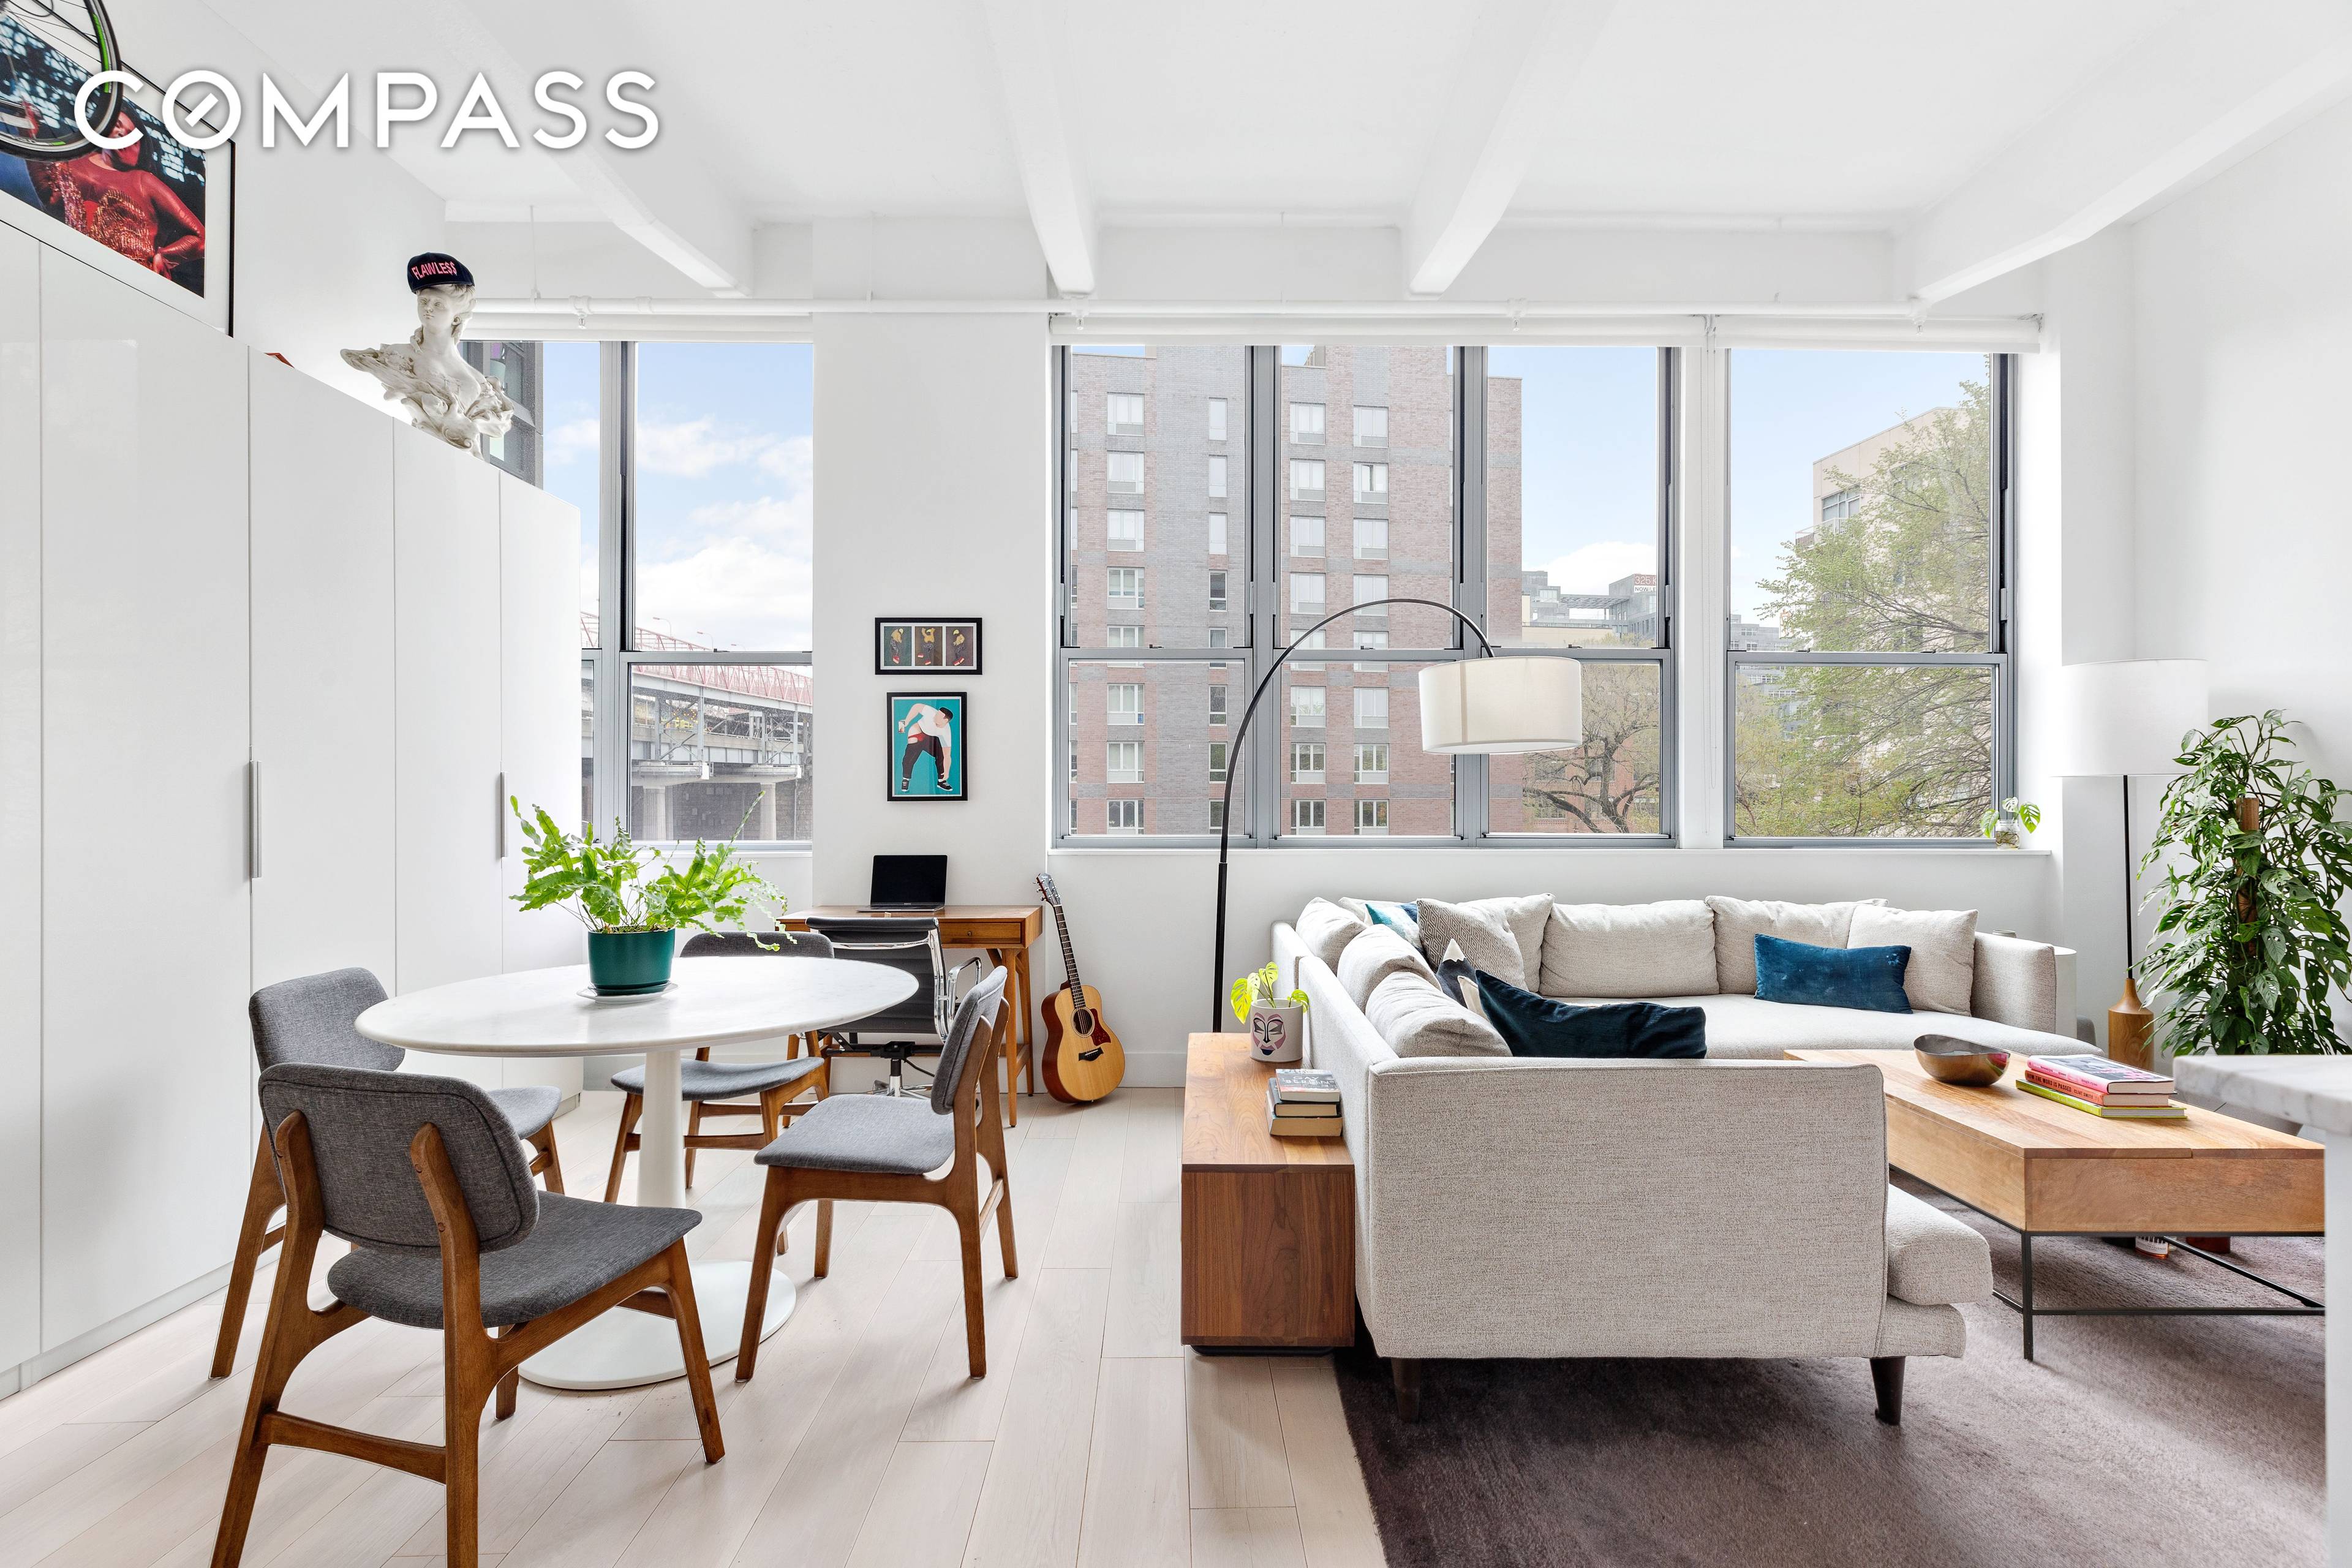 Welcome to 338 Berry Street, authentic loft living in South Williamsburg.